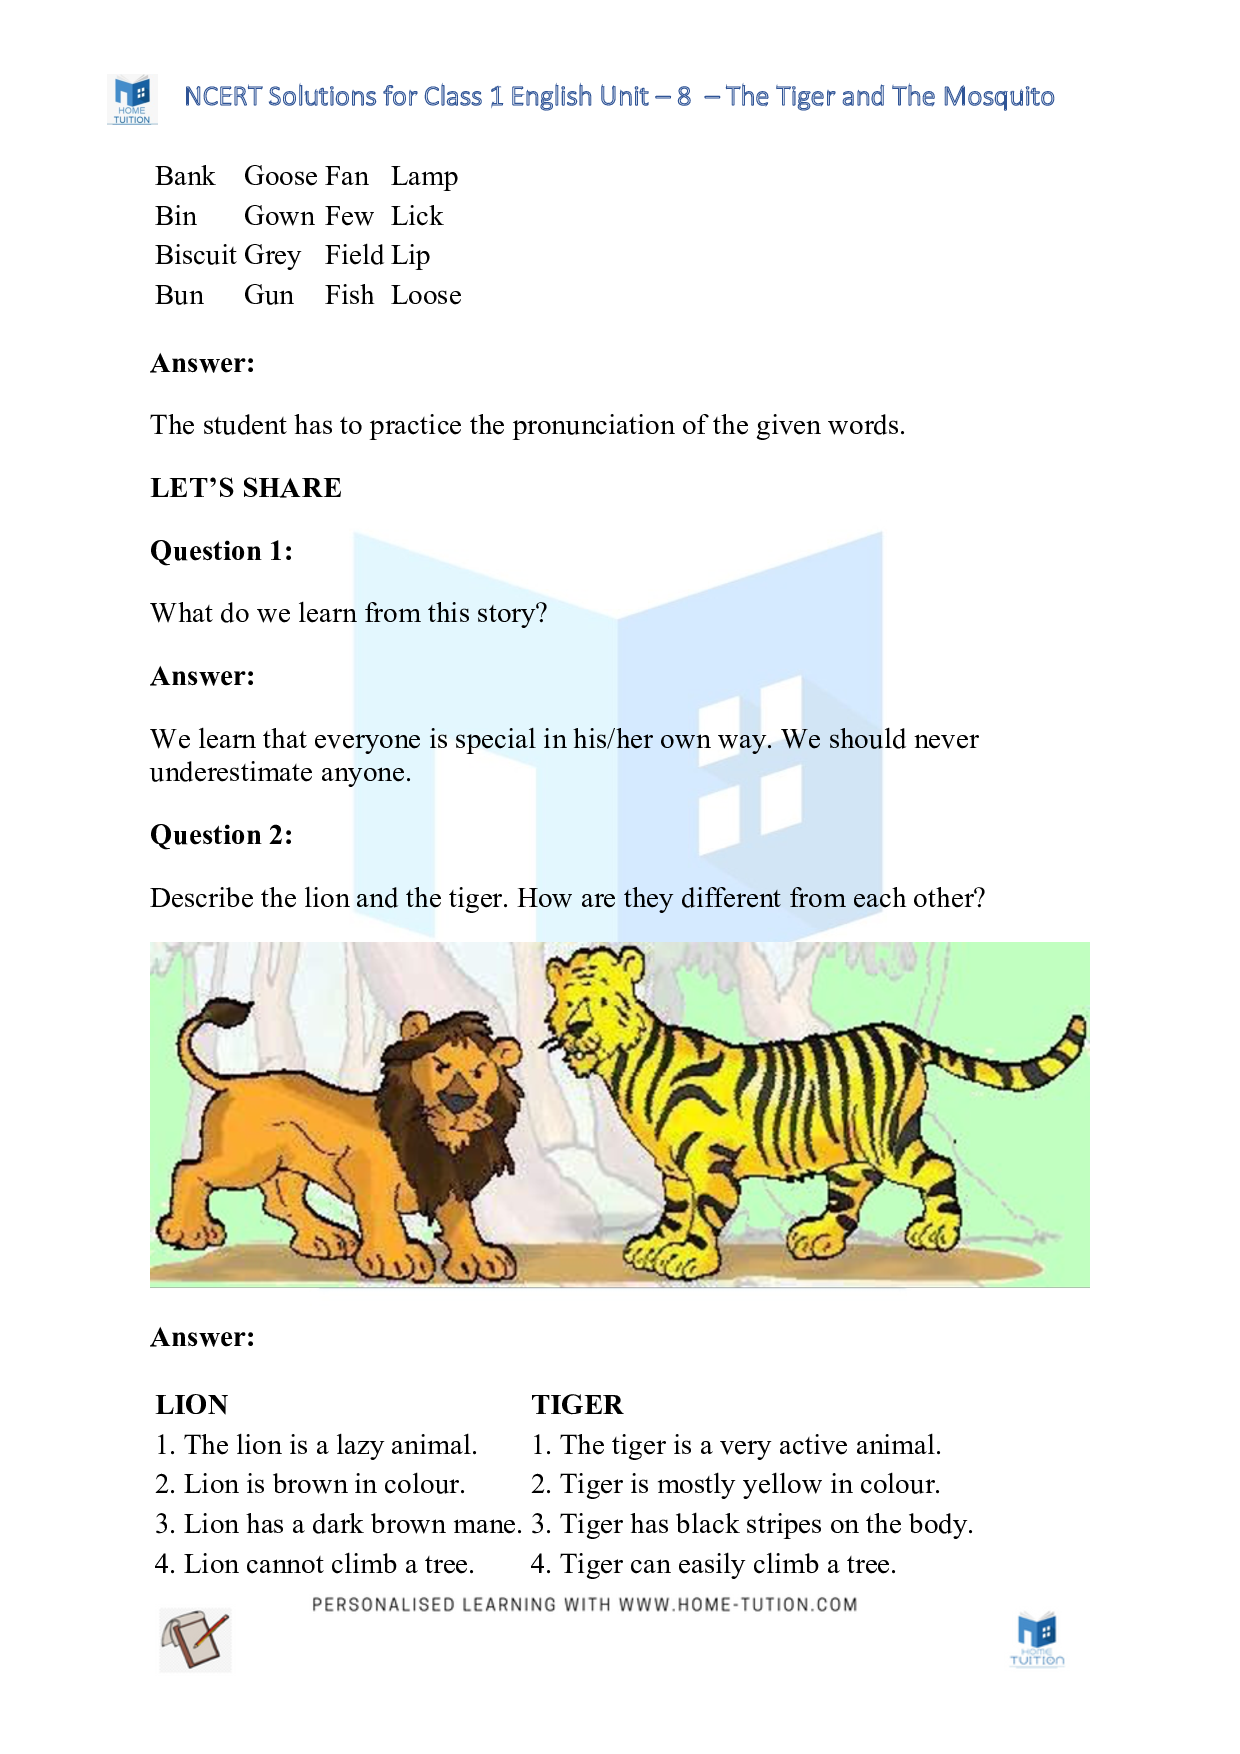 NCERT Solutions for Class 1 English Unit 8 - The Tiger and The Mosquito